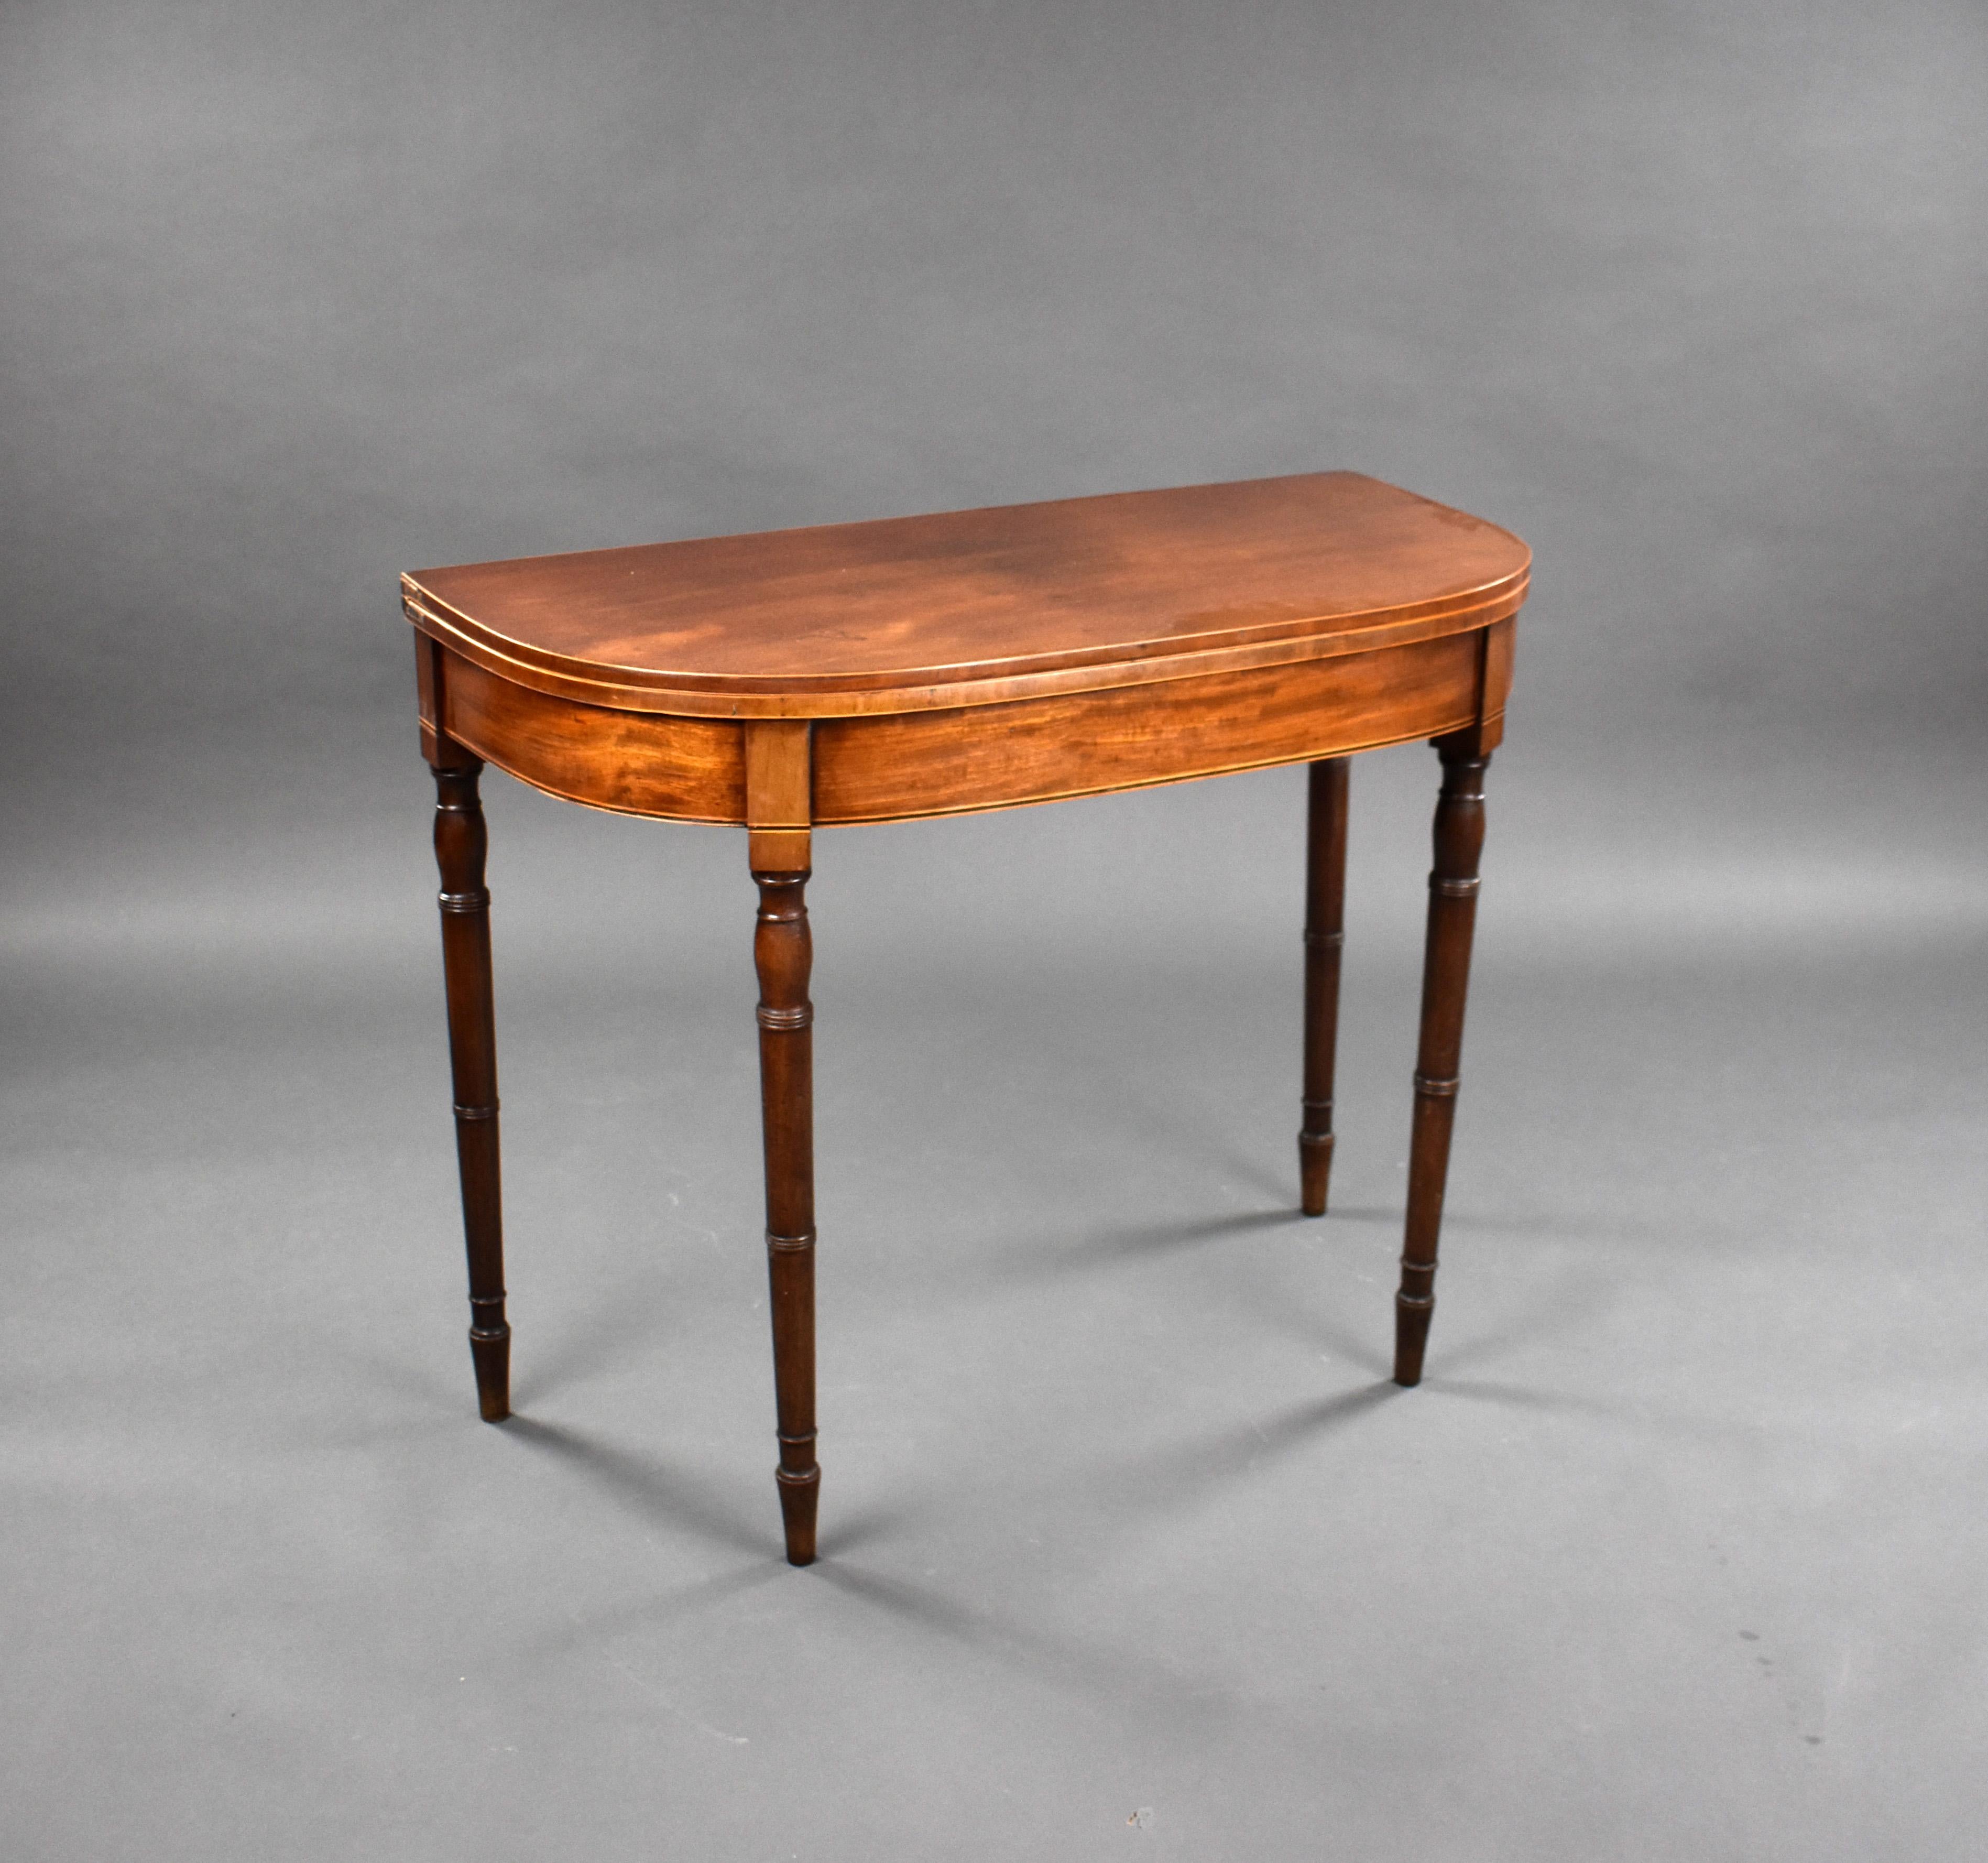 For sale is a George III mahogany tea table, having a fold over top and standing on elegantly turned legs, the table remains in good condition showing light wear commensurate with age and use. 

Measures: width: 92 cm depth: 45 cm height: 74 cm.